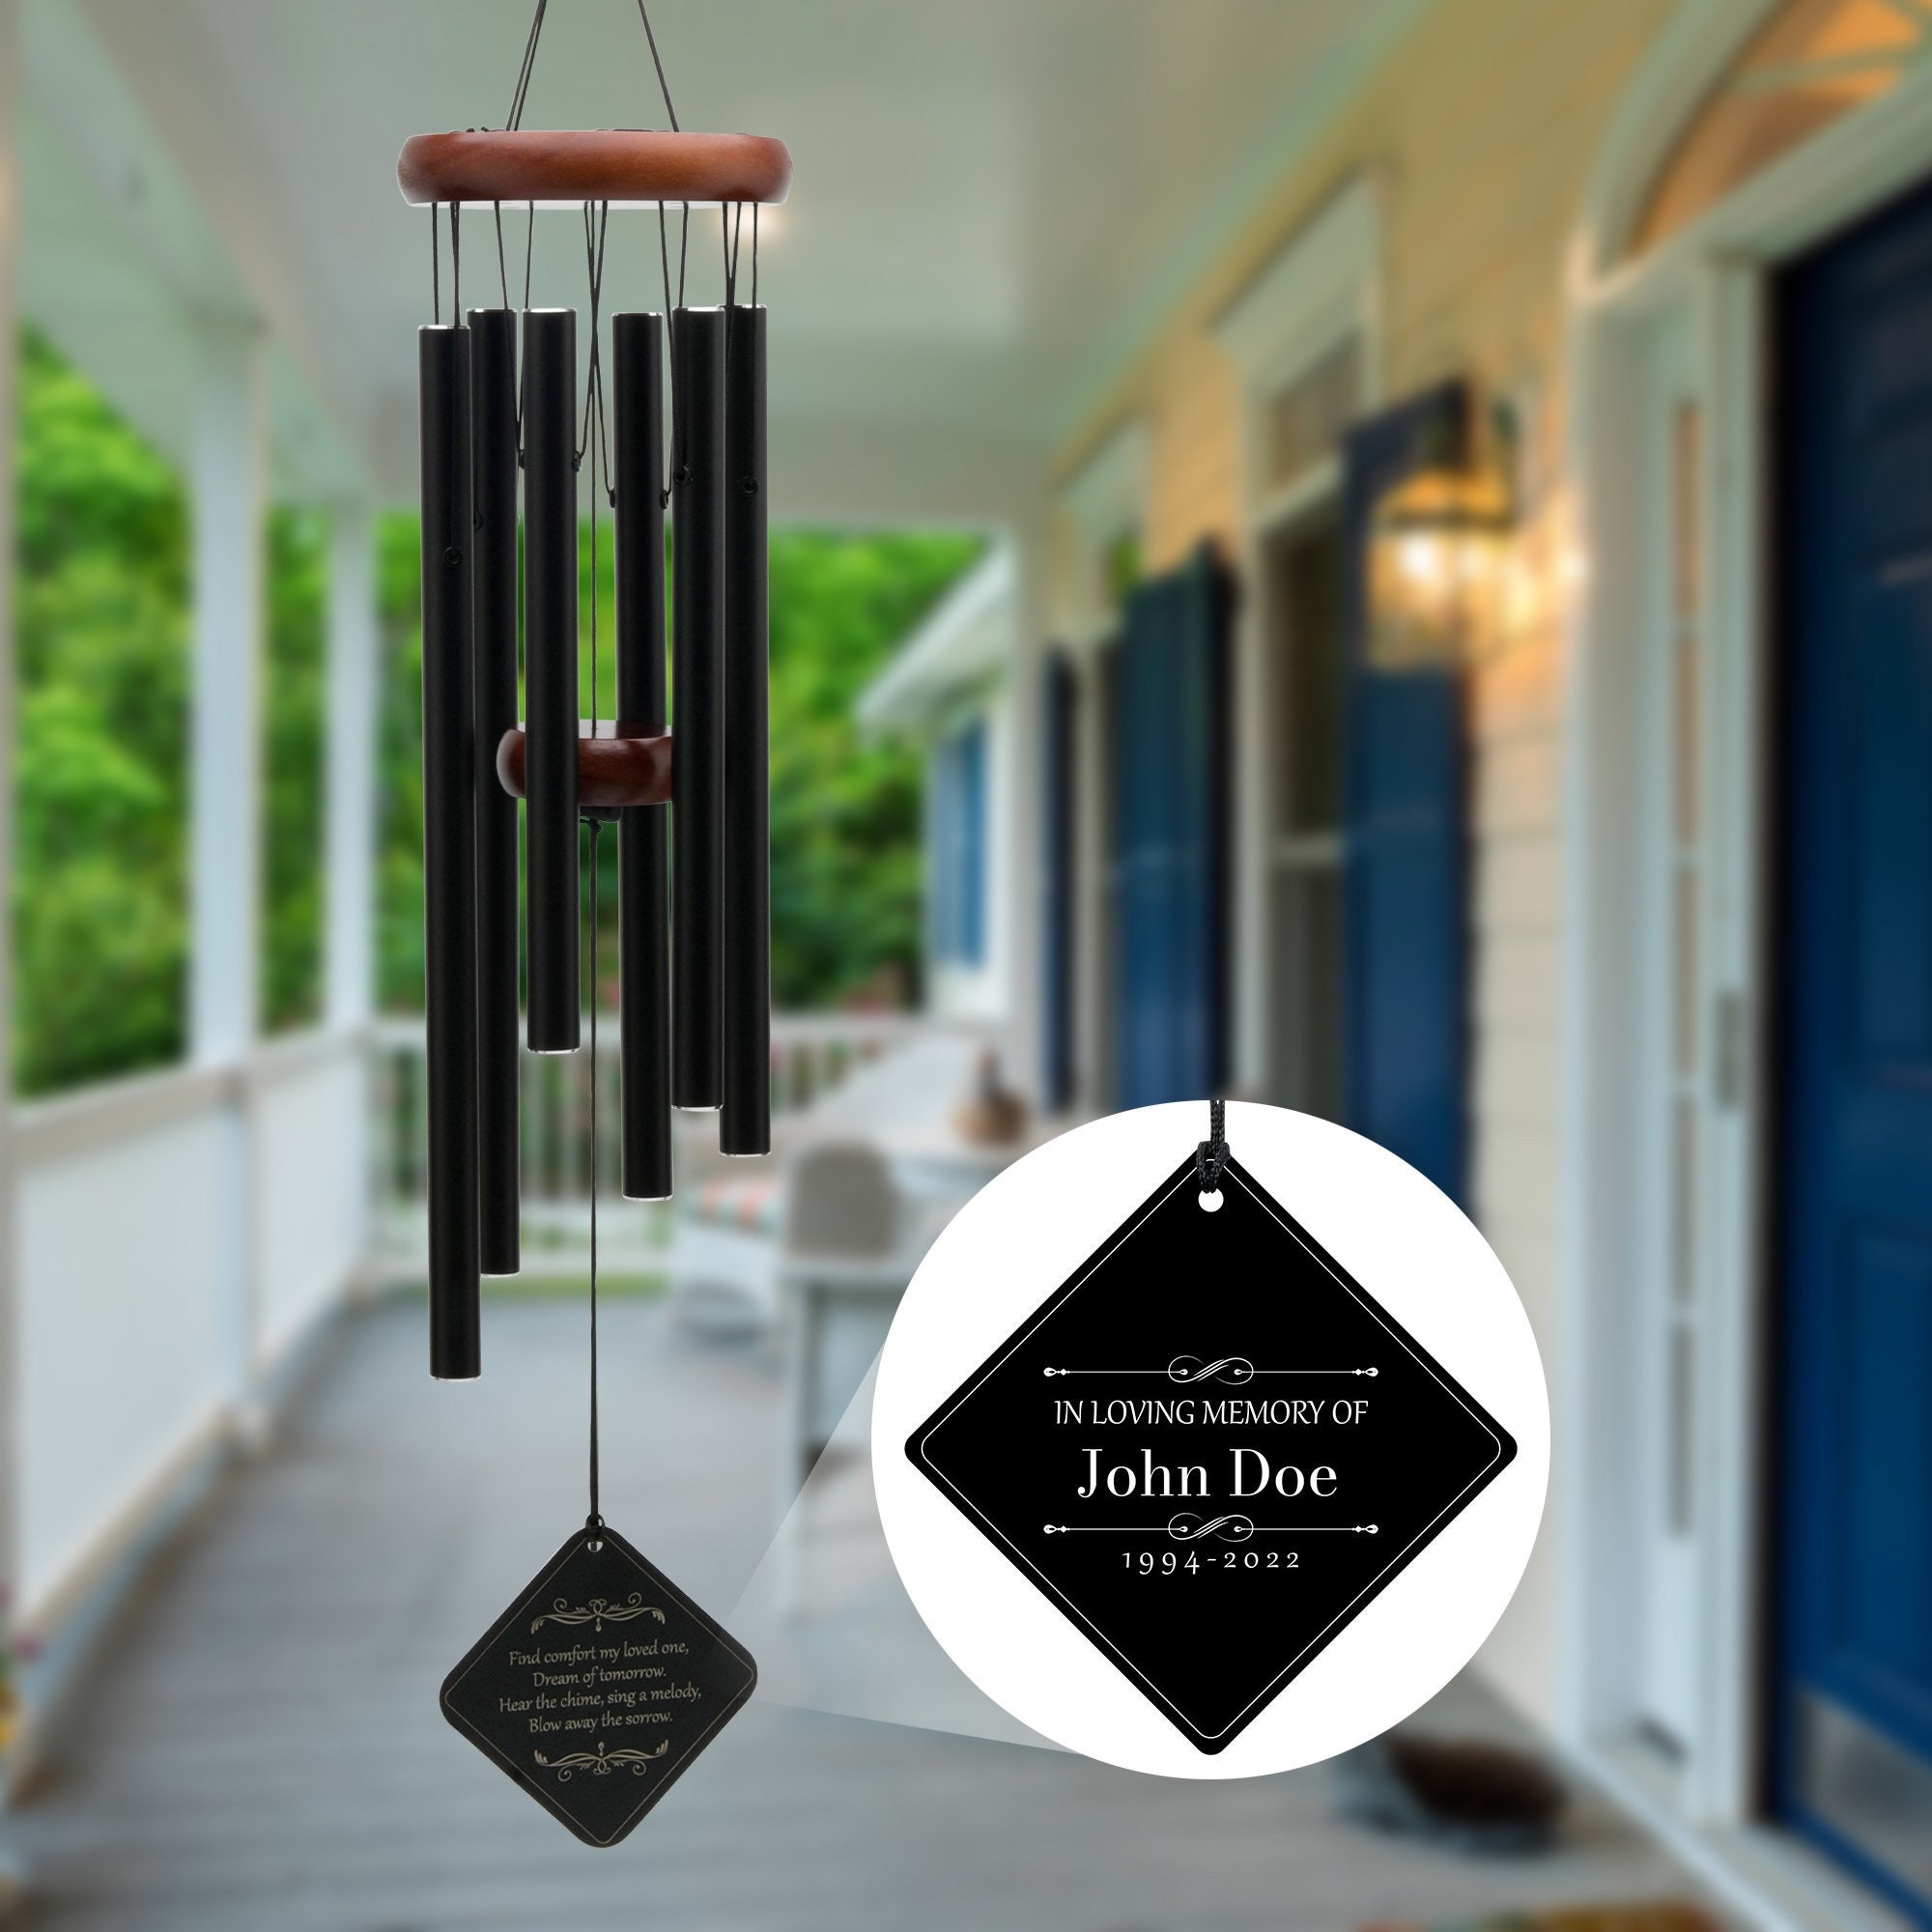 Personalized Memorial Wind Chime, Listen to the Wind